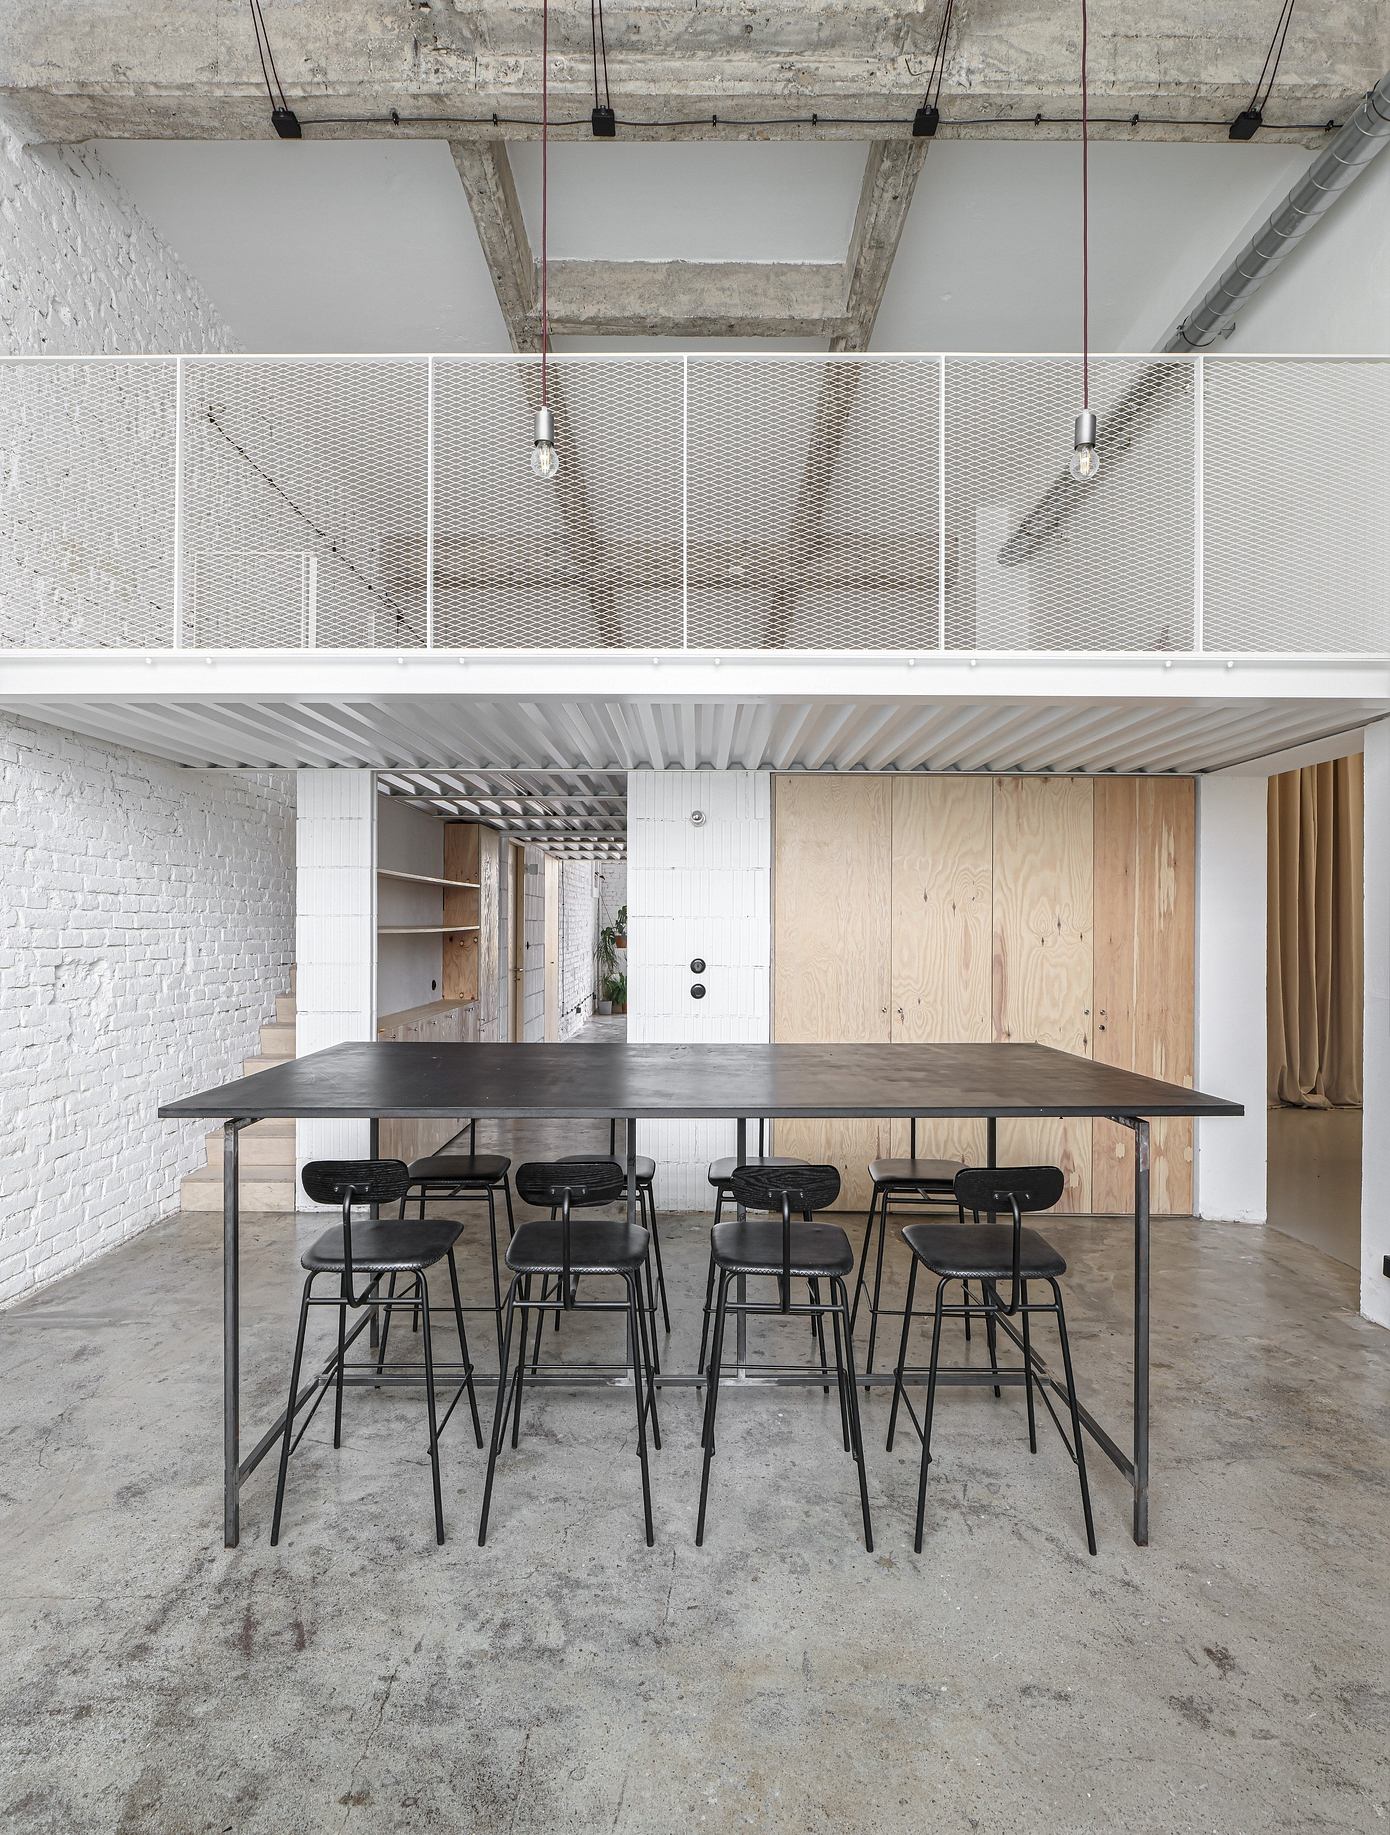 Monolot Offices: A Minimalist Industrial Transformation in Prague